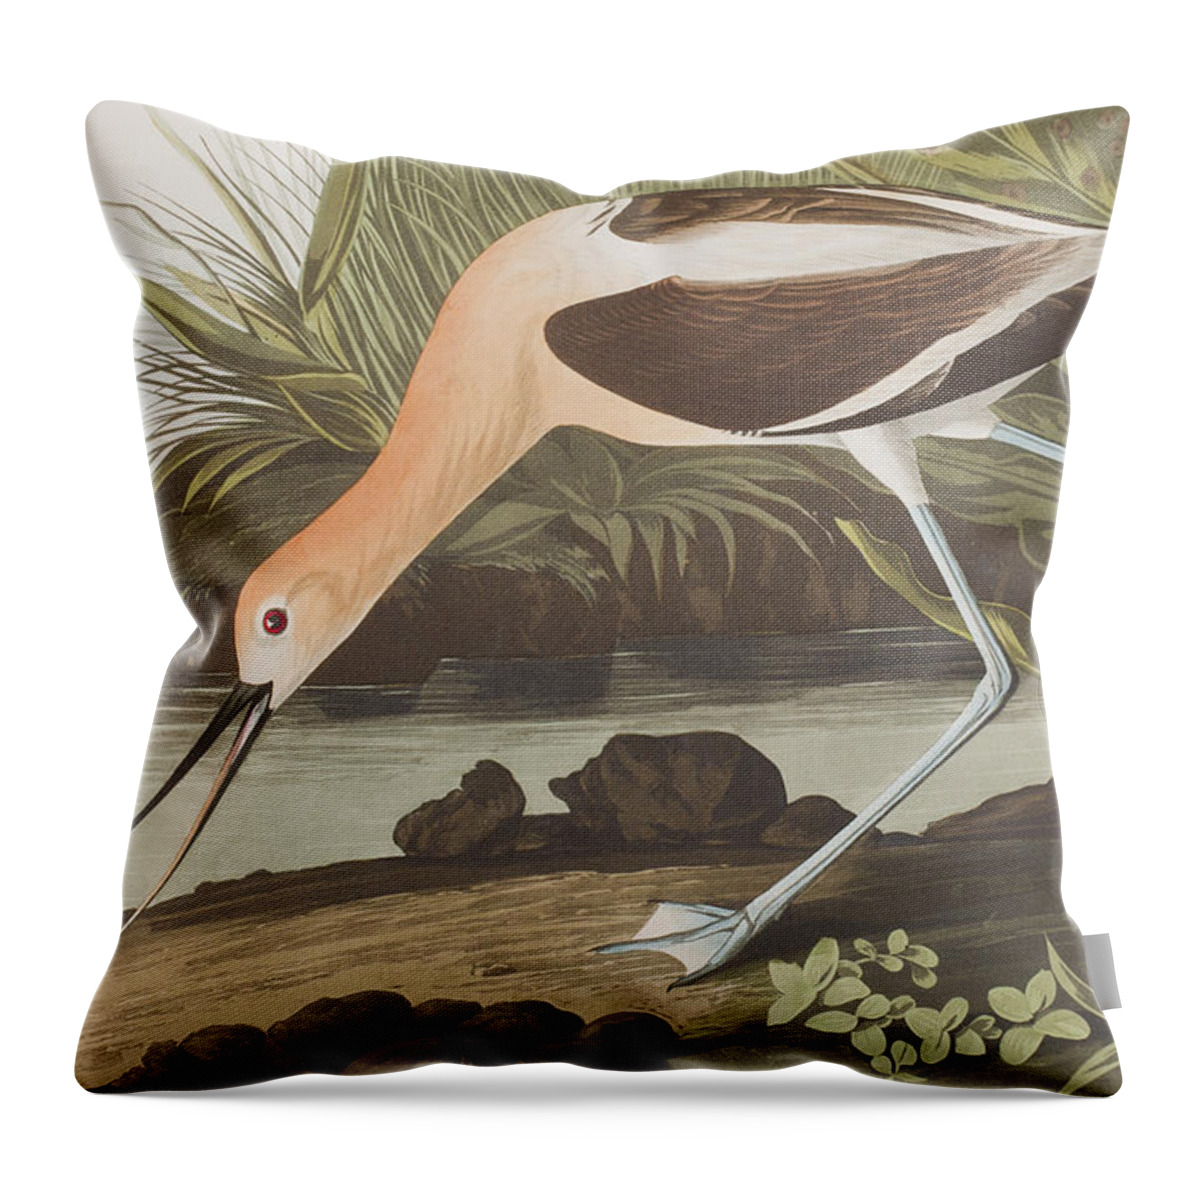 American Avocet Throw Pillow featuring the painting American Avocet by John James Audubon